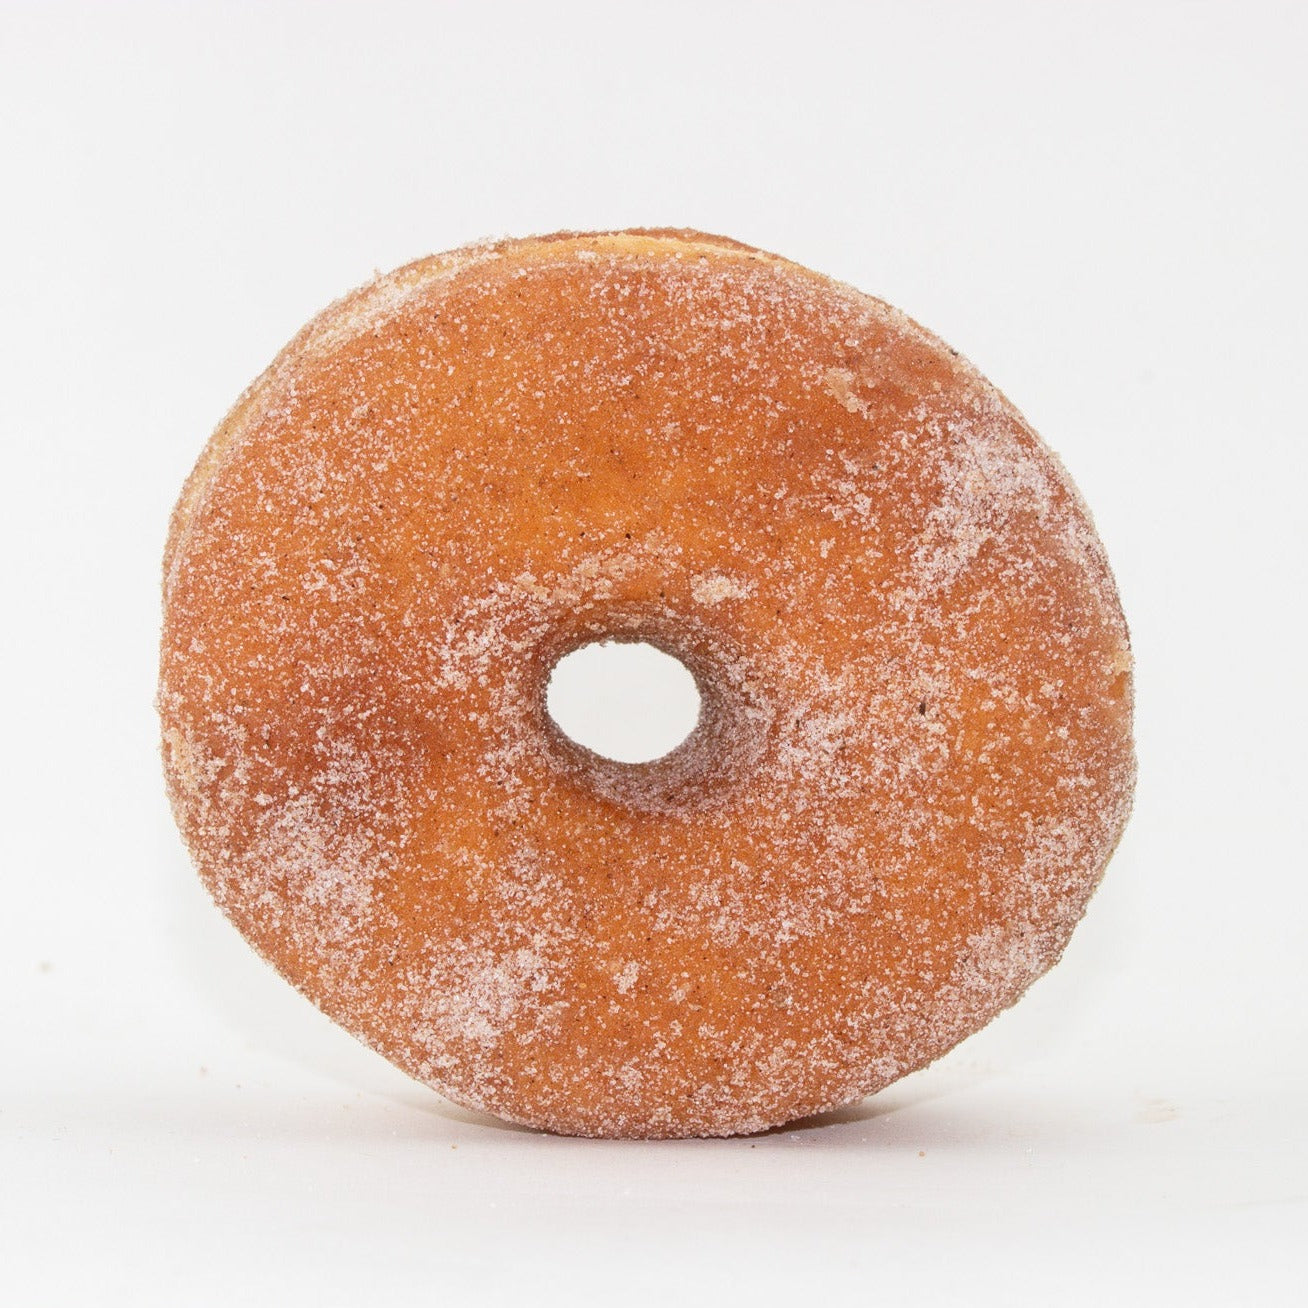 image of whole cinnamon and sugar dusted doughnut with a hole in the middle 